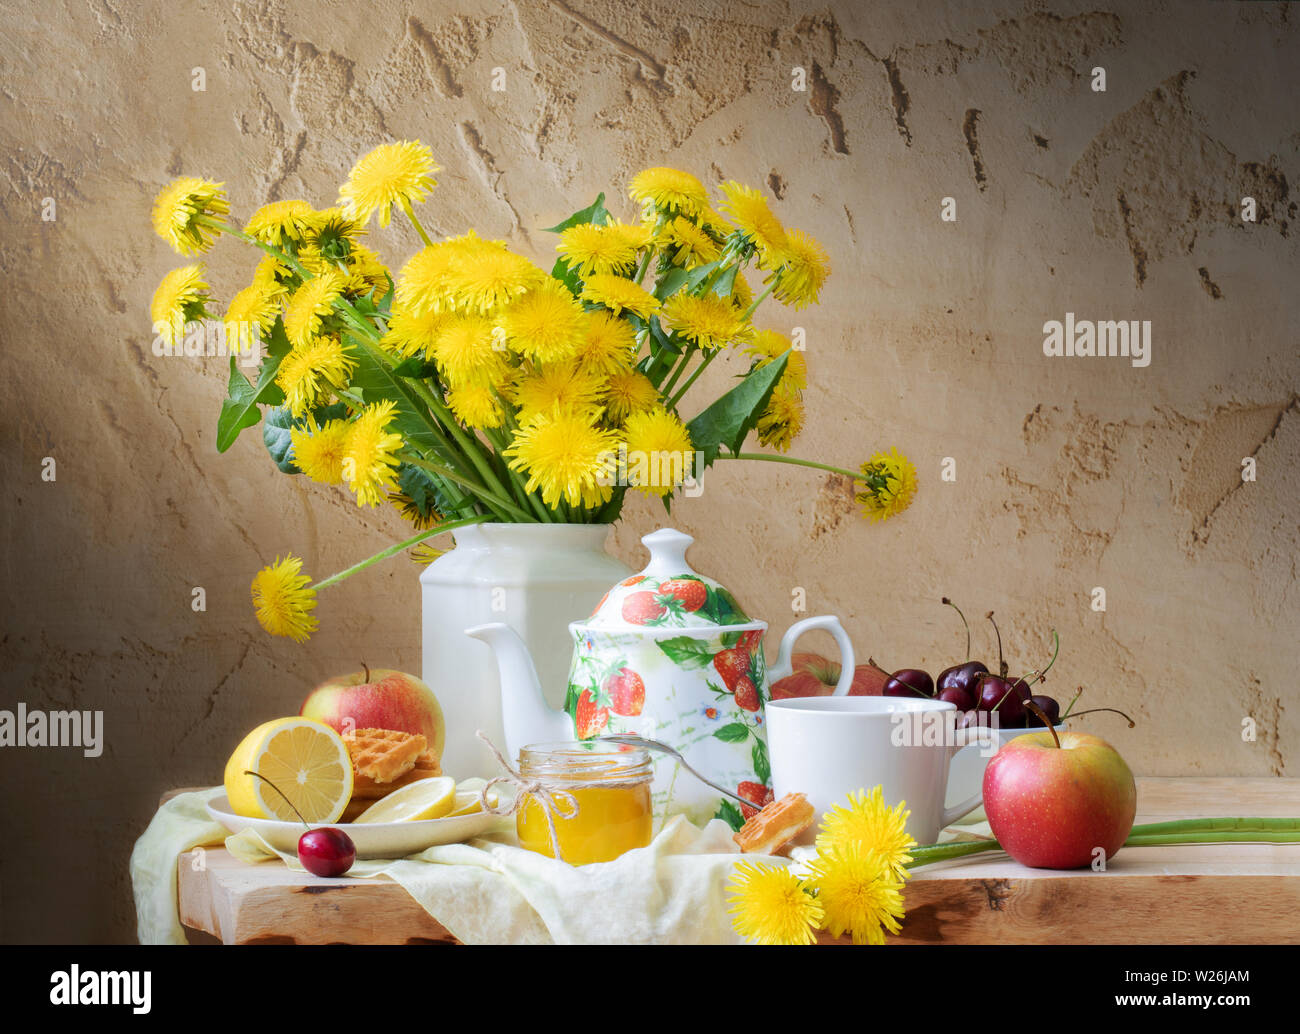 Still life with dandelions, kettle, fruit and honey on wooden table on old cracked background. Stock Photo